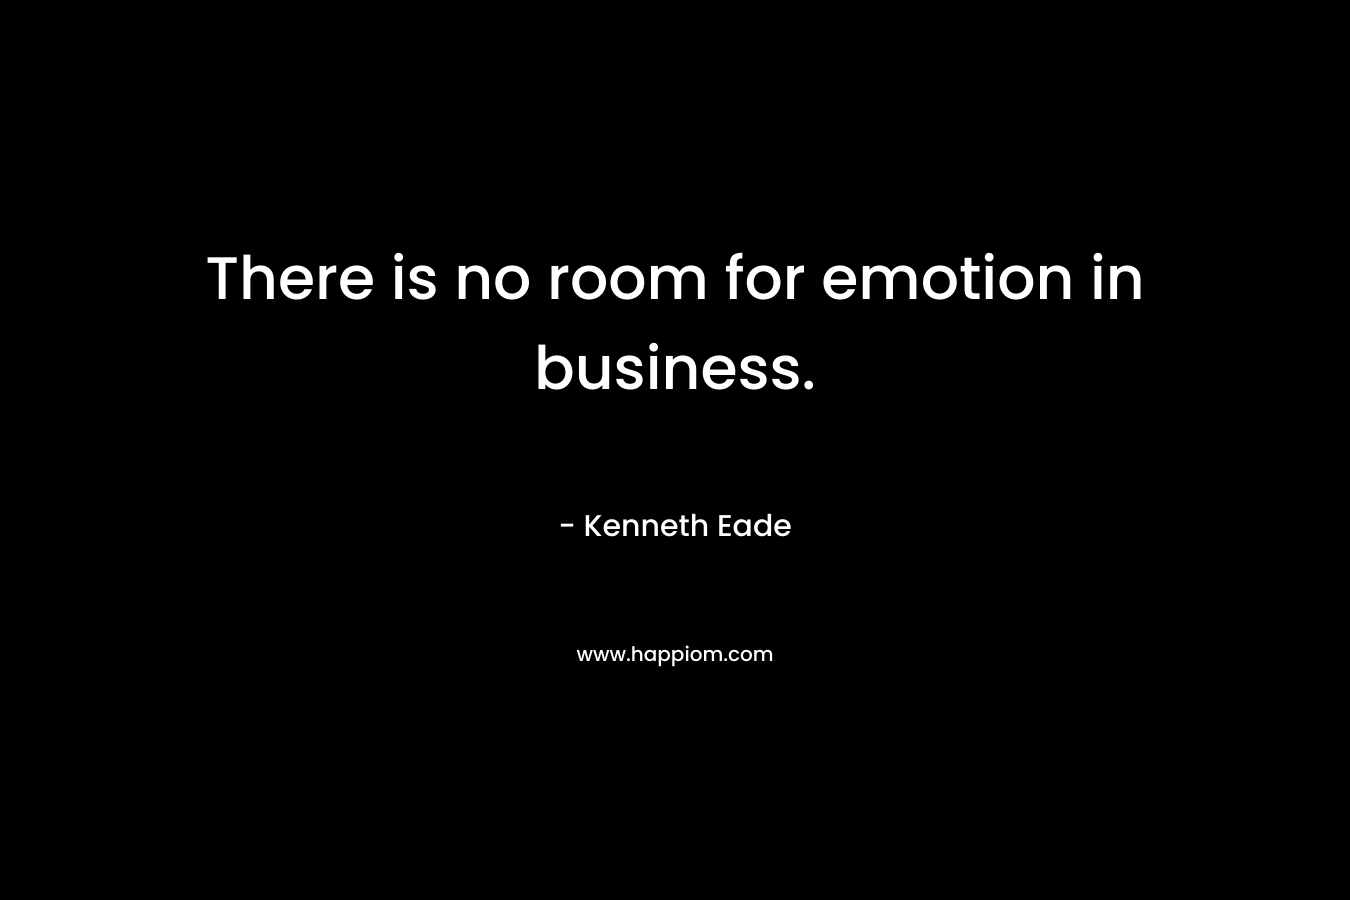 There is no room for emotion in business.